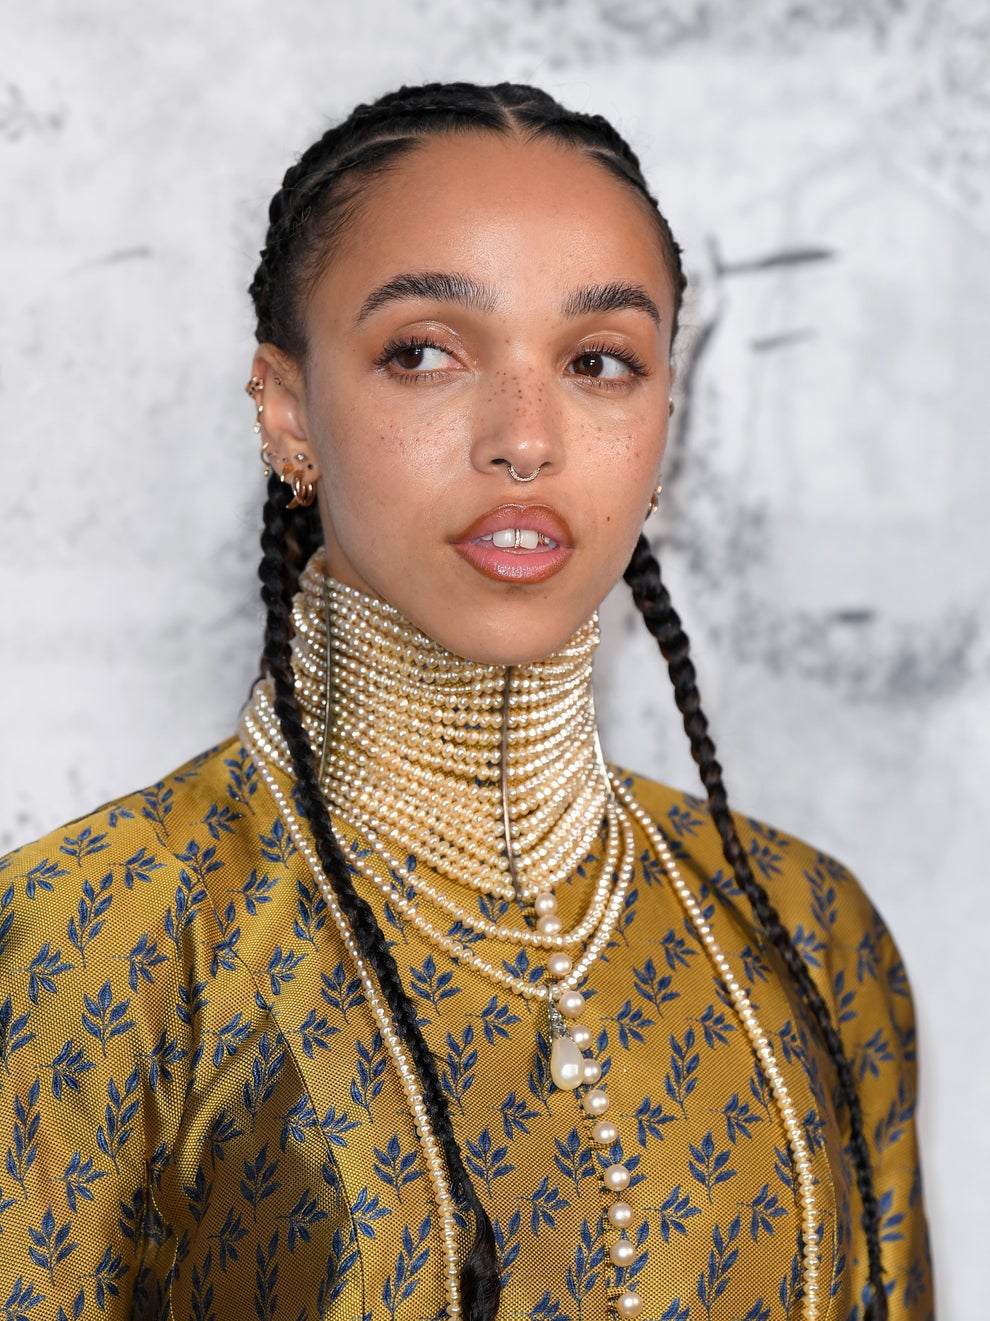 FKA Twigs On Her Relationship With Shia LaBeouf